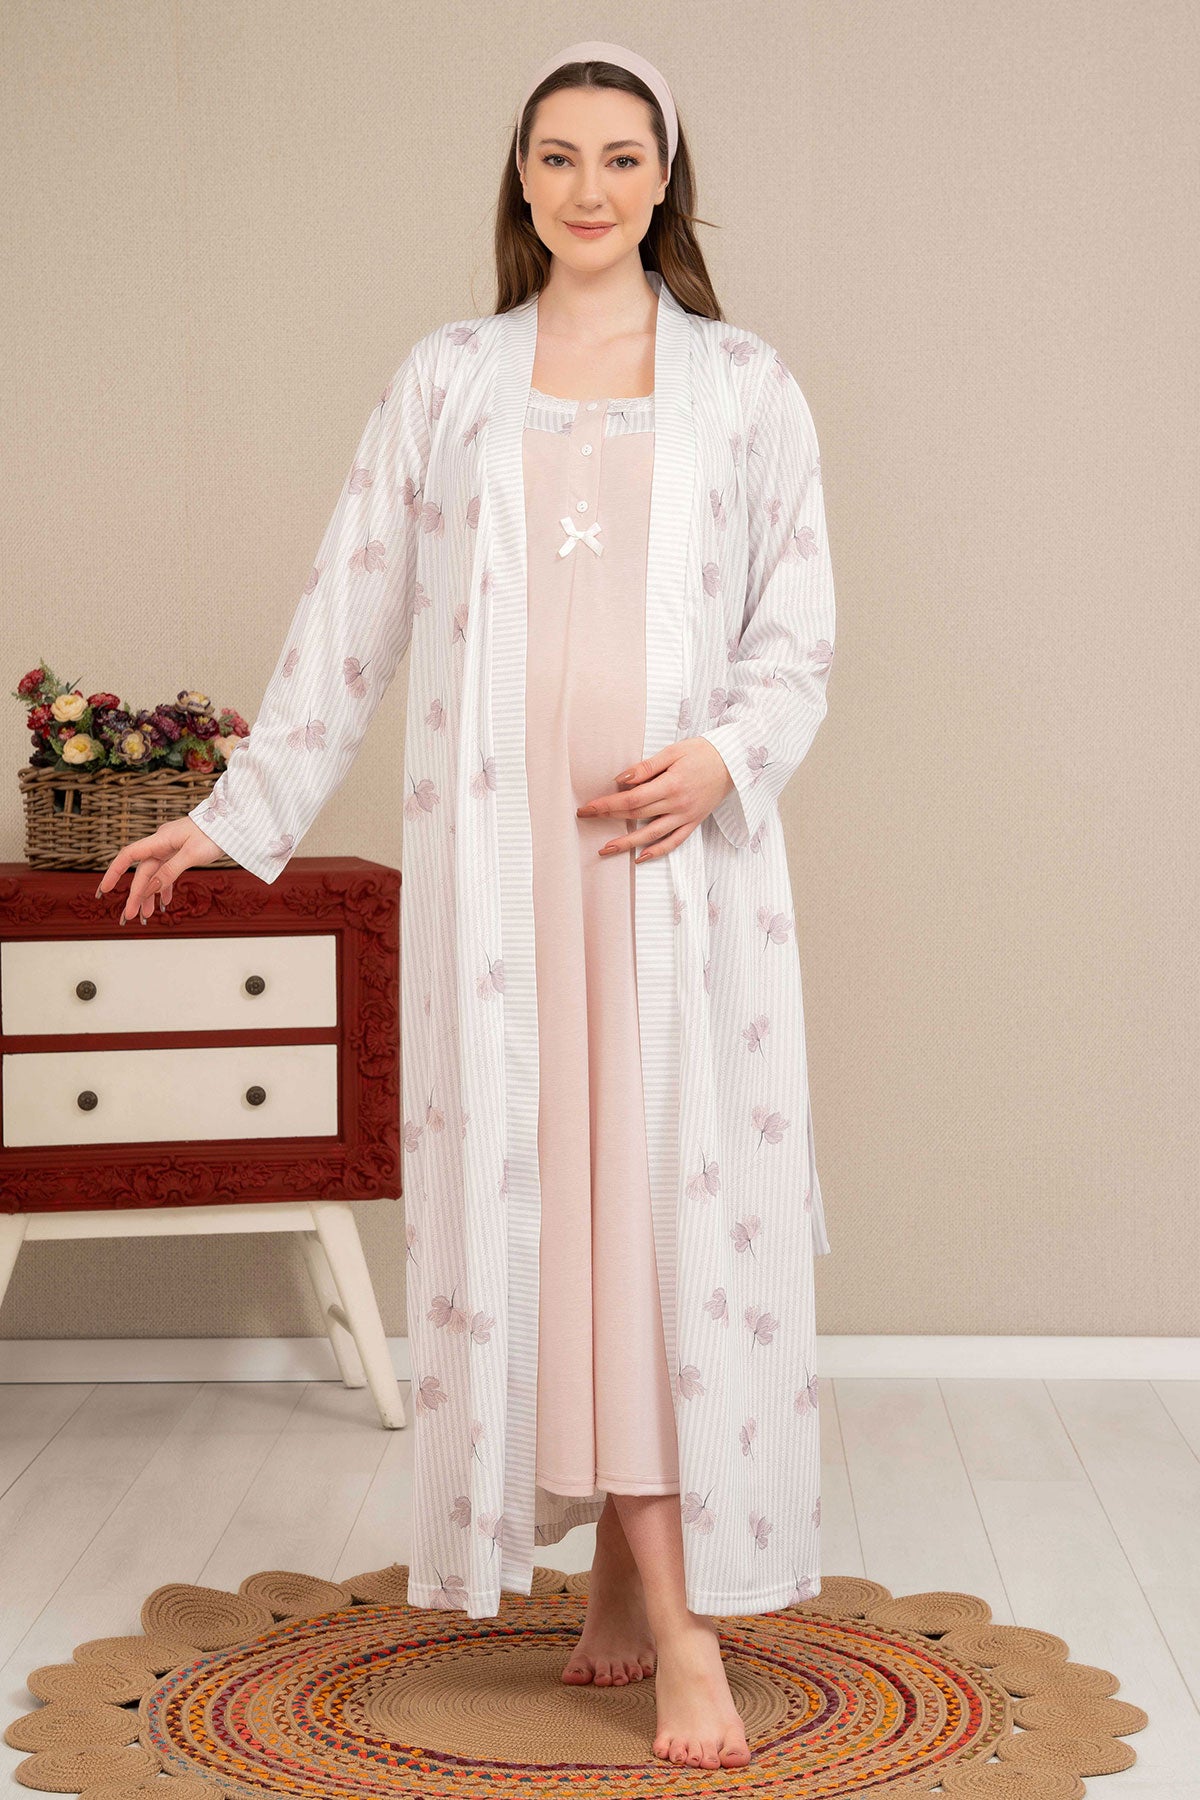 Shopymommy 4522 Strap Maternity & Nursing Nightgown With Flower Pattern Robe Dried Rose